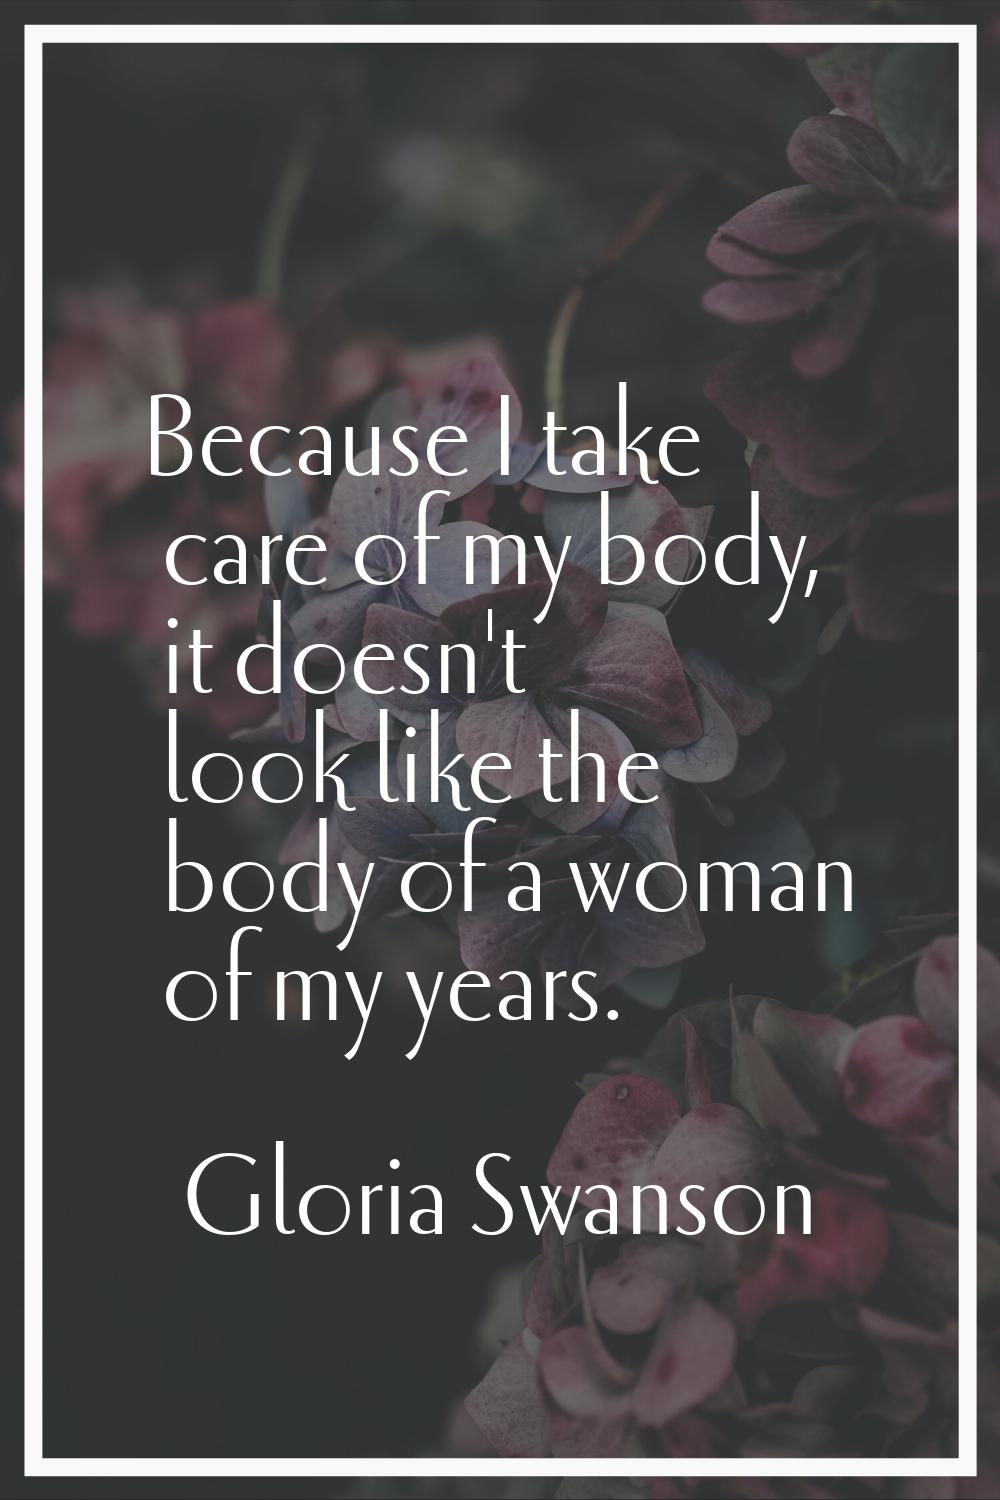 Because I take care of my body, it doesn't look like the body of a woman of my years.